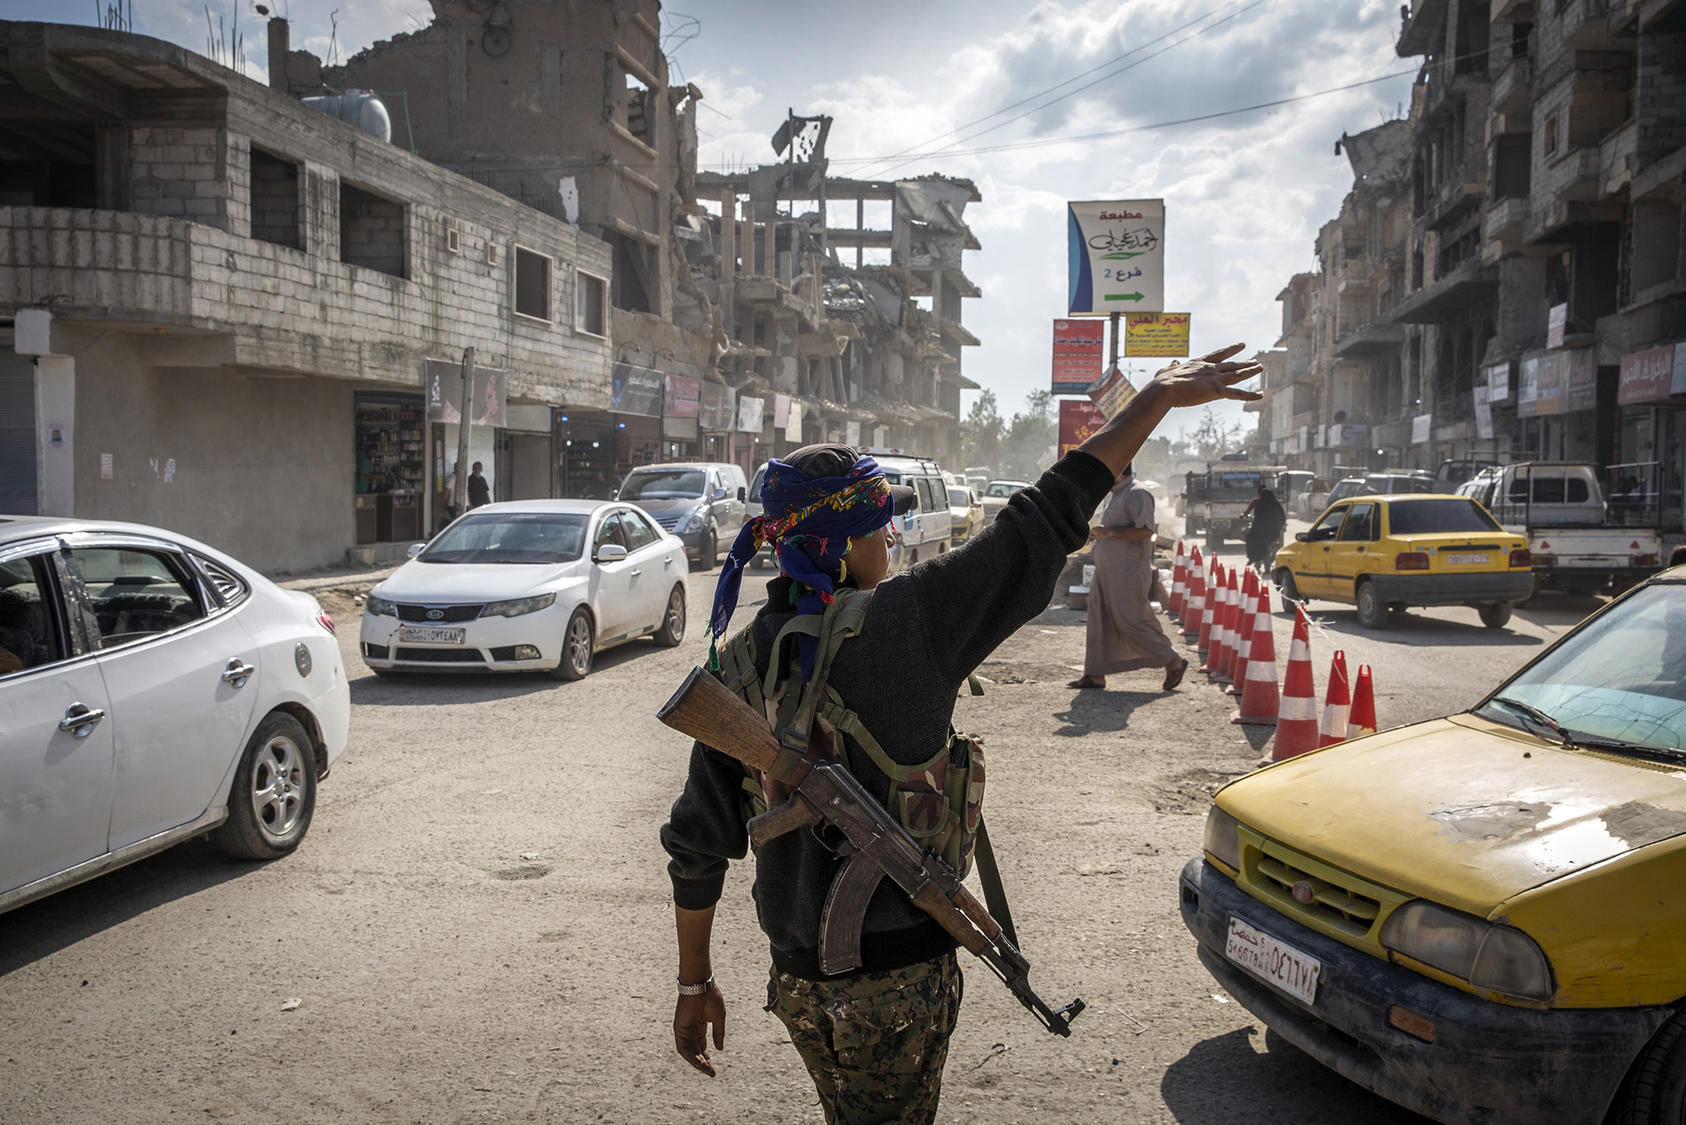 A police officer mans a checkpoint in Raqqa, Syria, on June 13, 2018. Despite the liberation of Raqqa from ISIS, the group remains a potent threat. (Ivor Prickett/The New York Times)